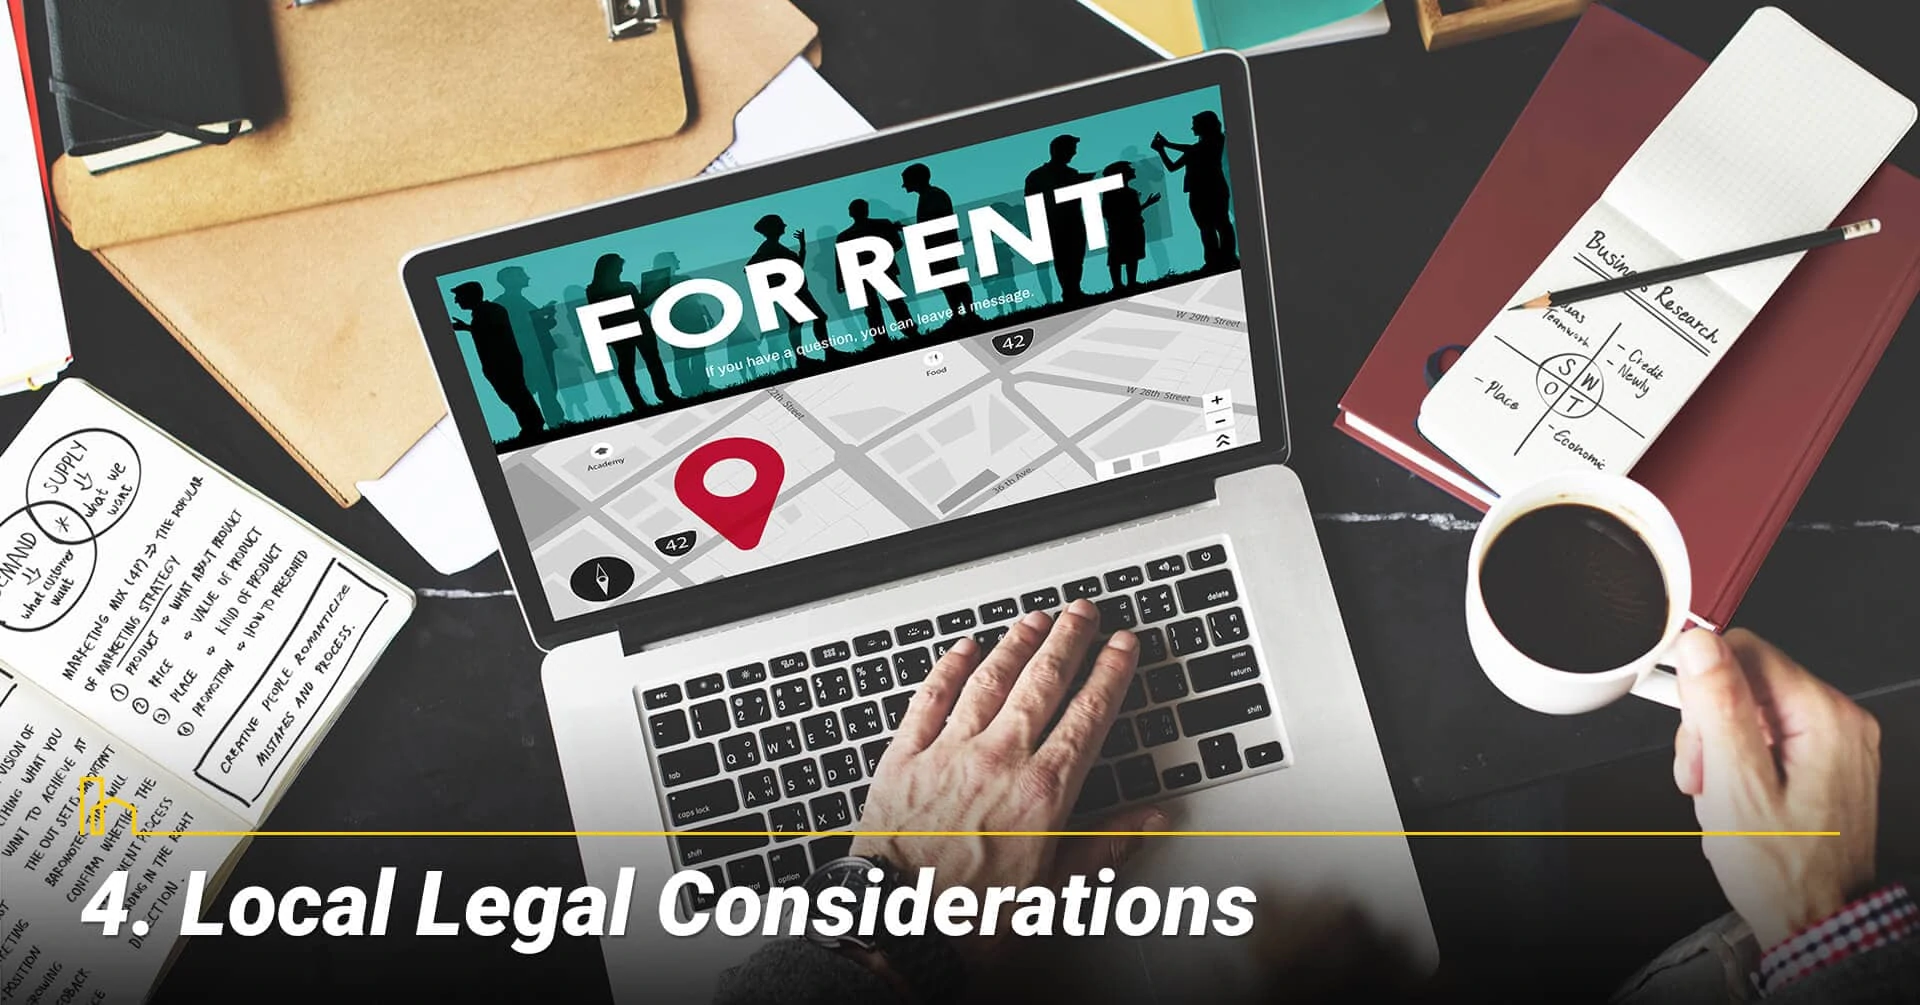 Local Legal Considerations, consider the legal aspect